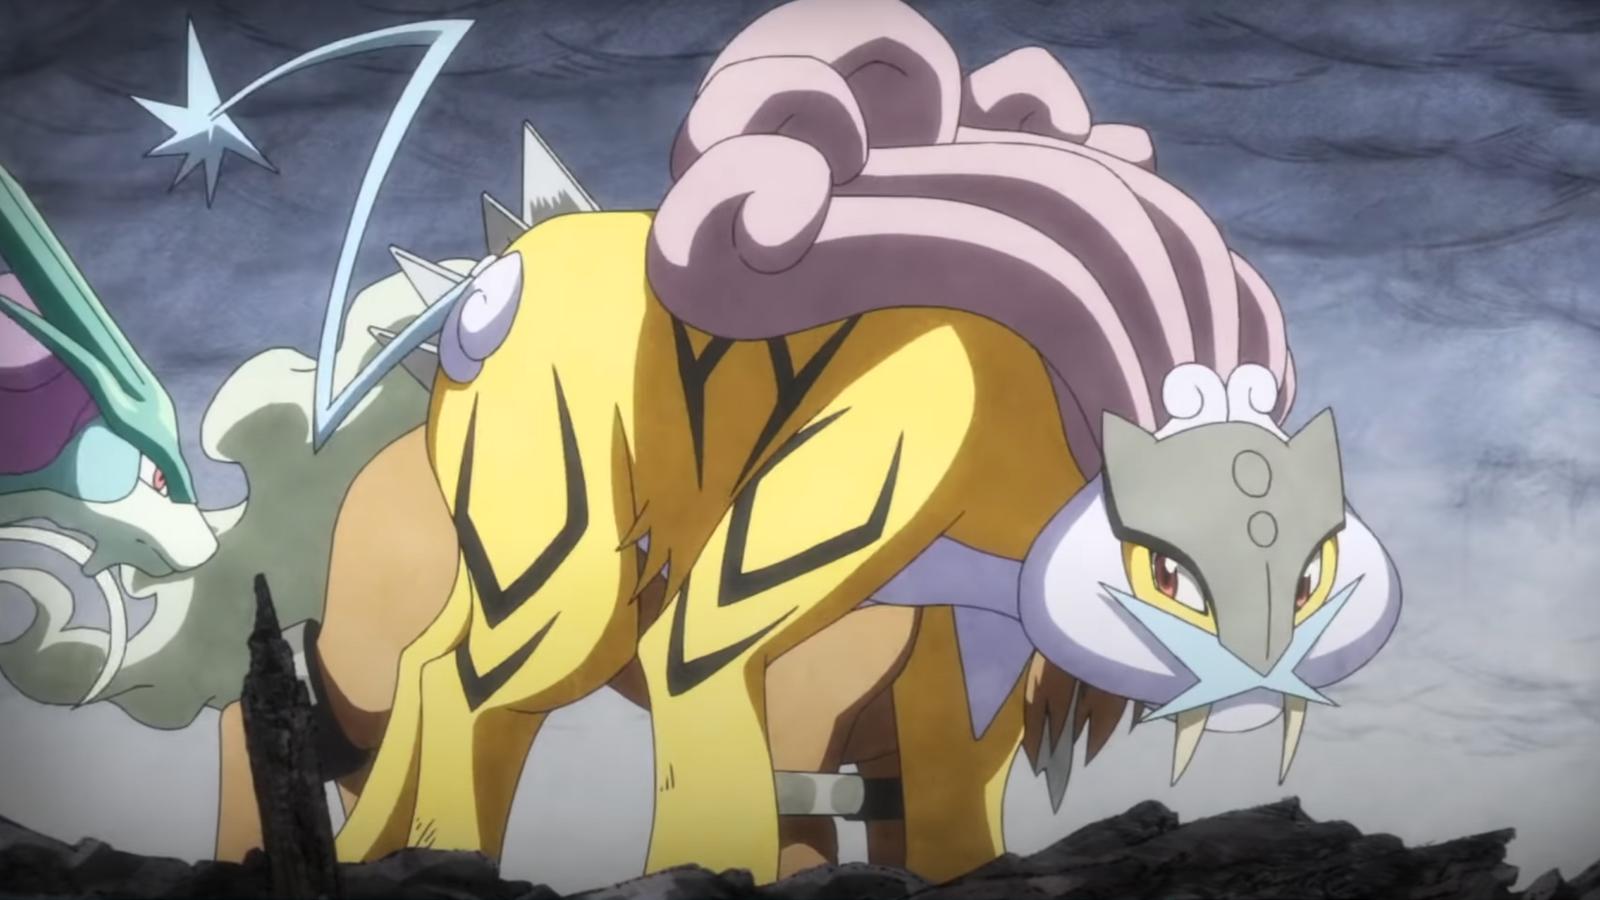 Why Was Zacian Banned From Competitive Ubers Pokemon? 